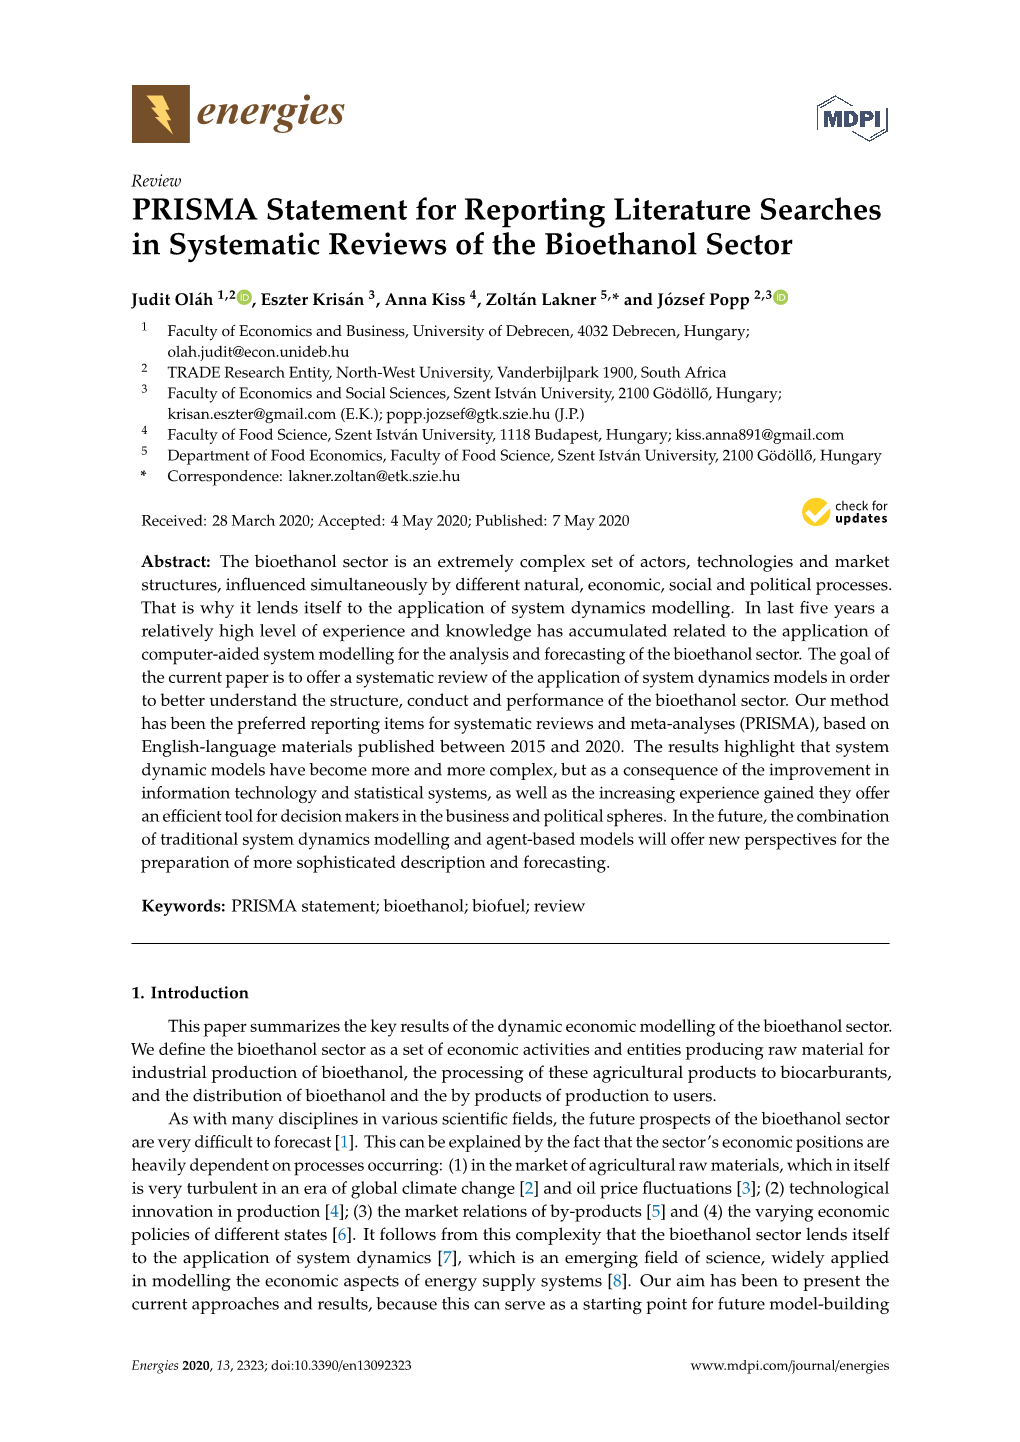 PRISMA Statement for Reporting Literature Searches in Systematic Reviews of the Bioethanol Sector